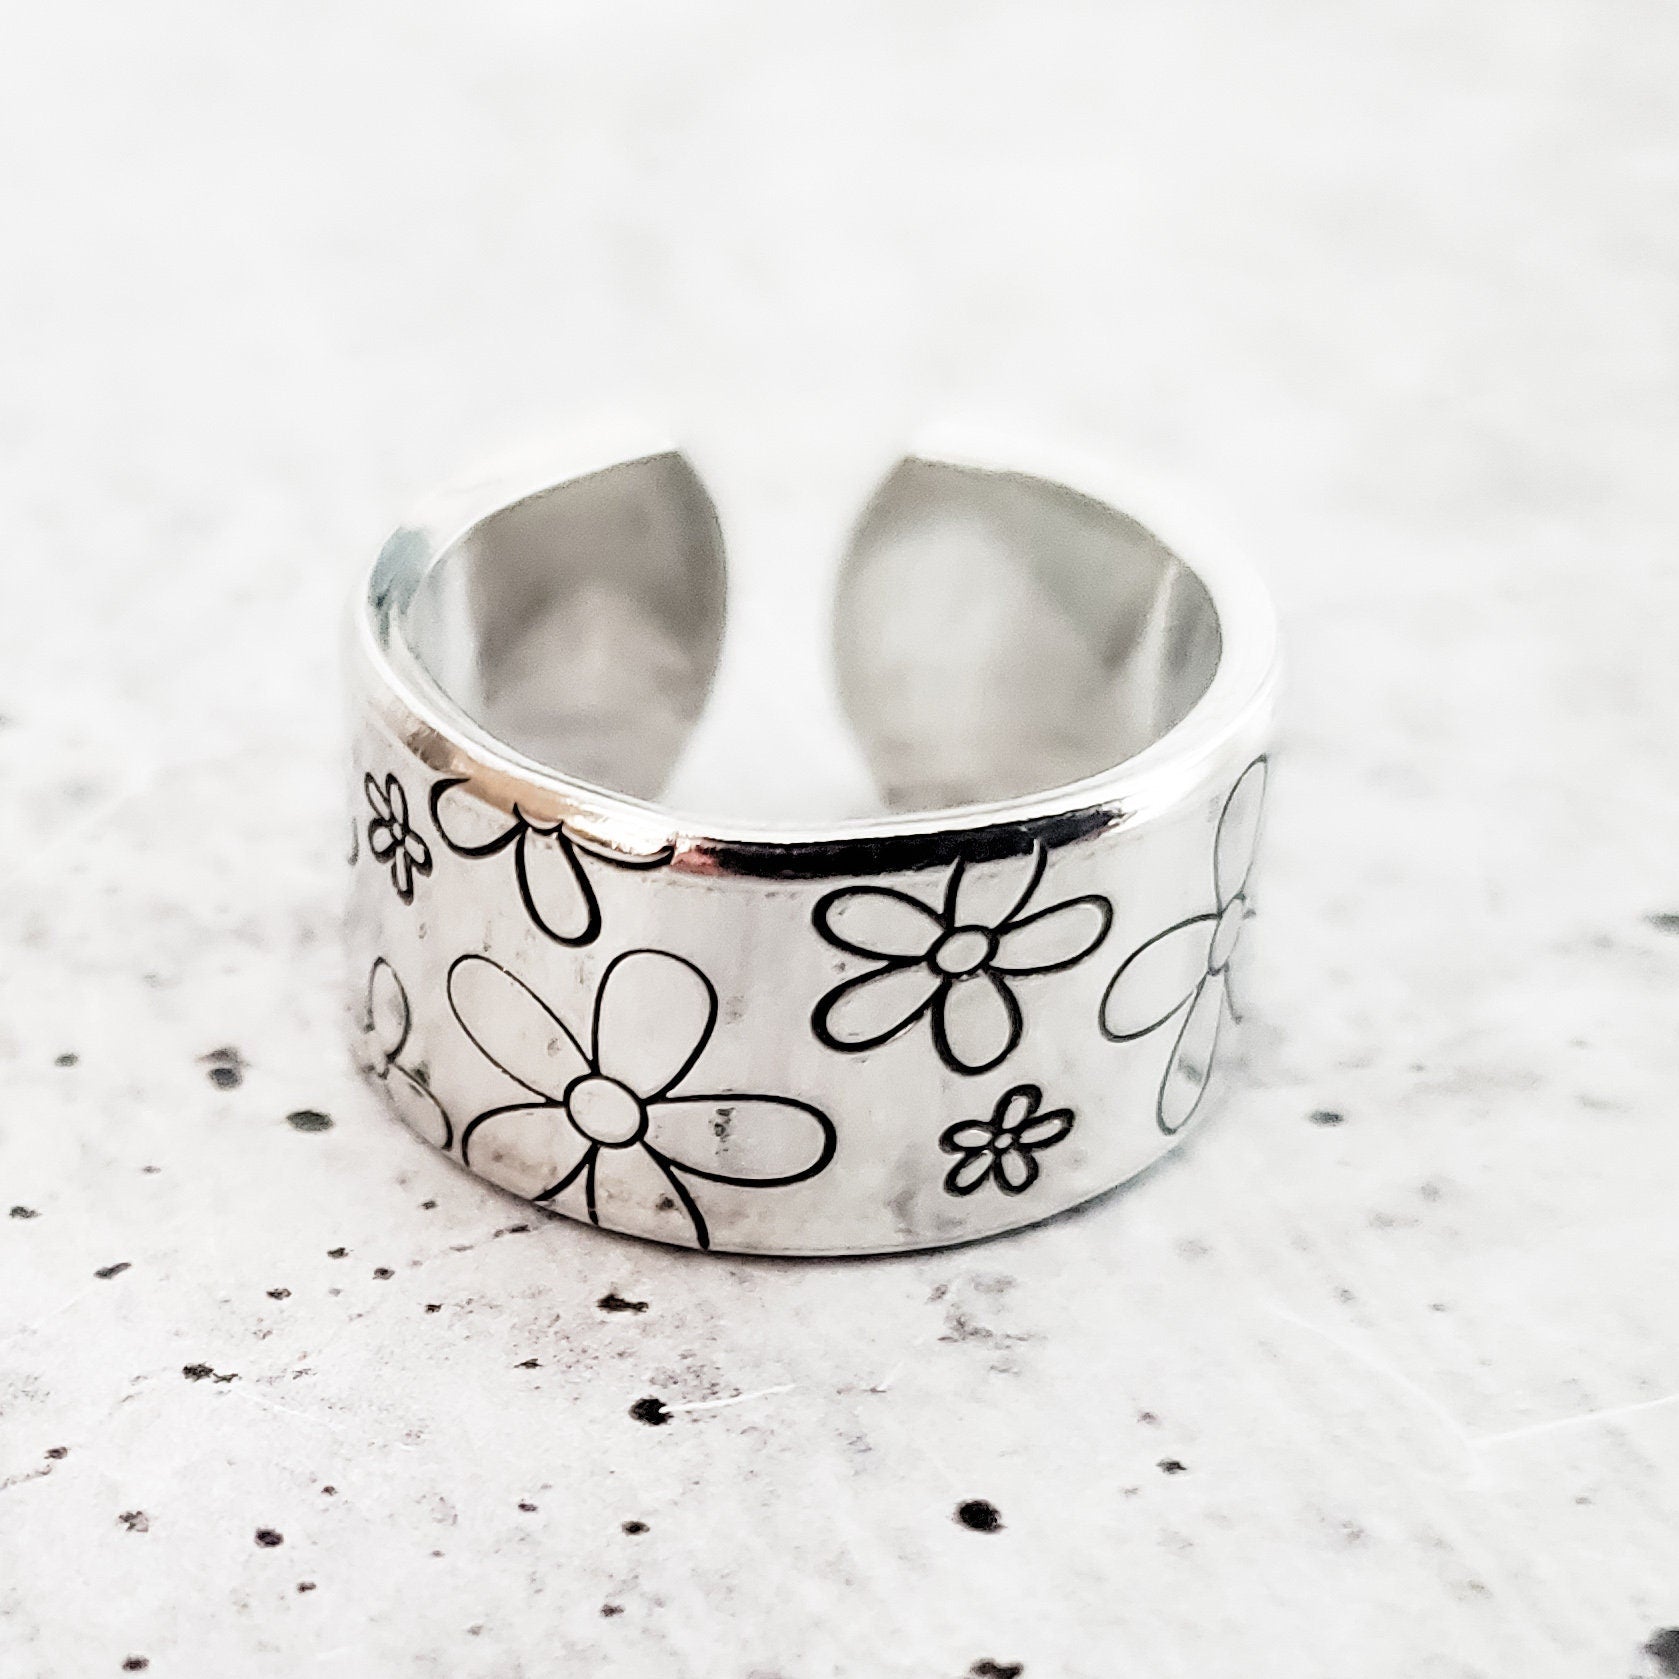 Daisy Ring - Silver Flower Ring with Daisies - Birthday Gift for Daughter - Teen Jewelry - Silver Band Ring for Her - Daisy Flower Jewelry